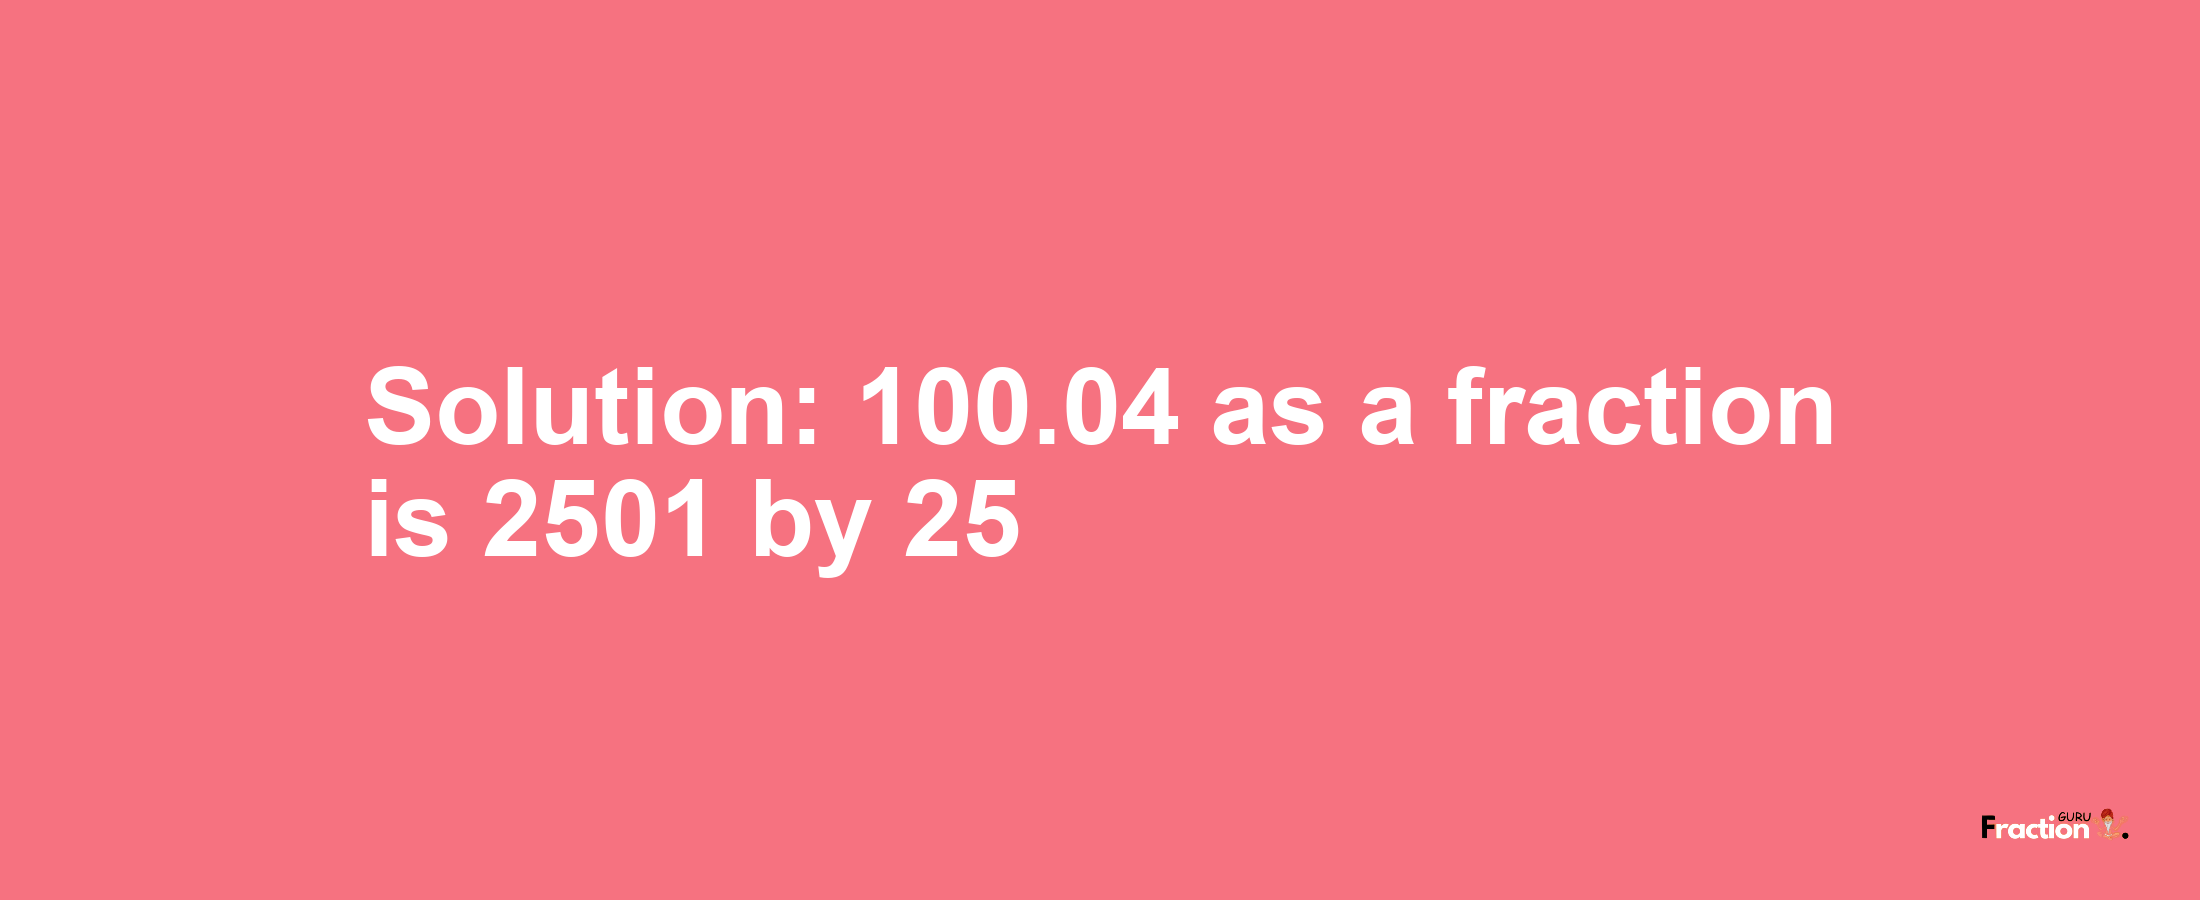 Solution:100.04 as a fraction is 2501/25